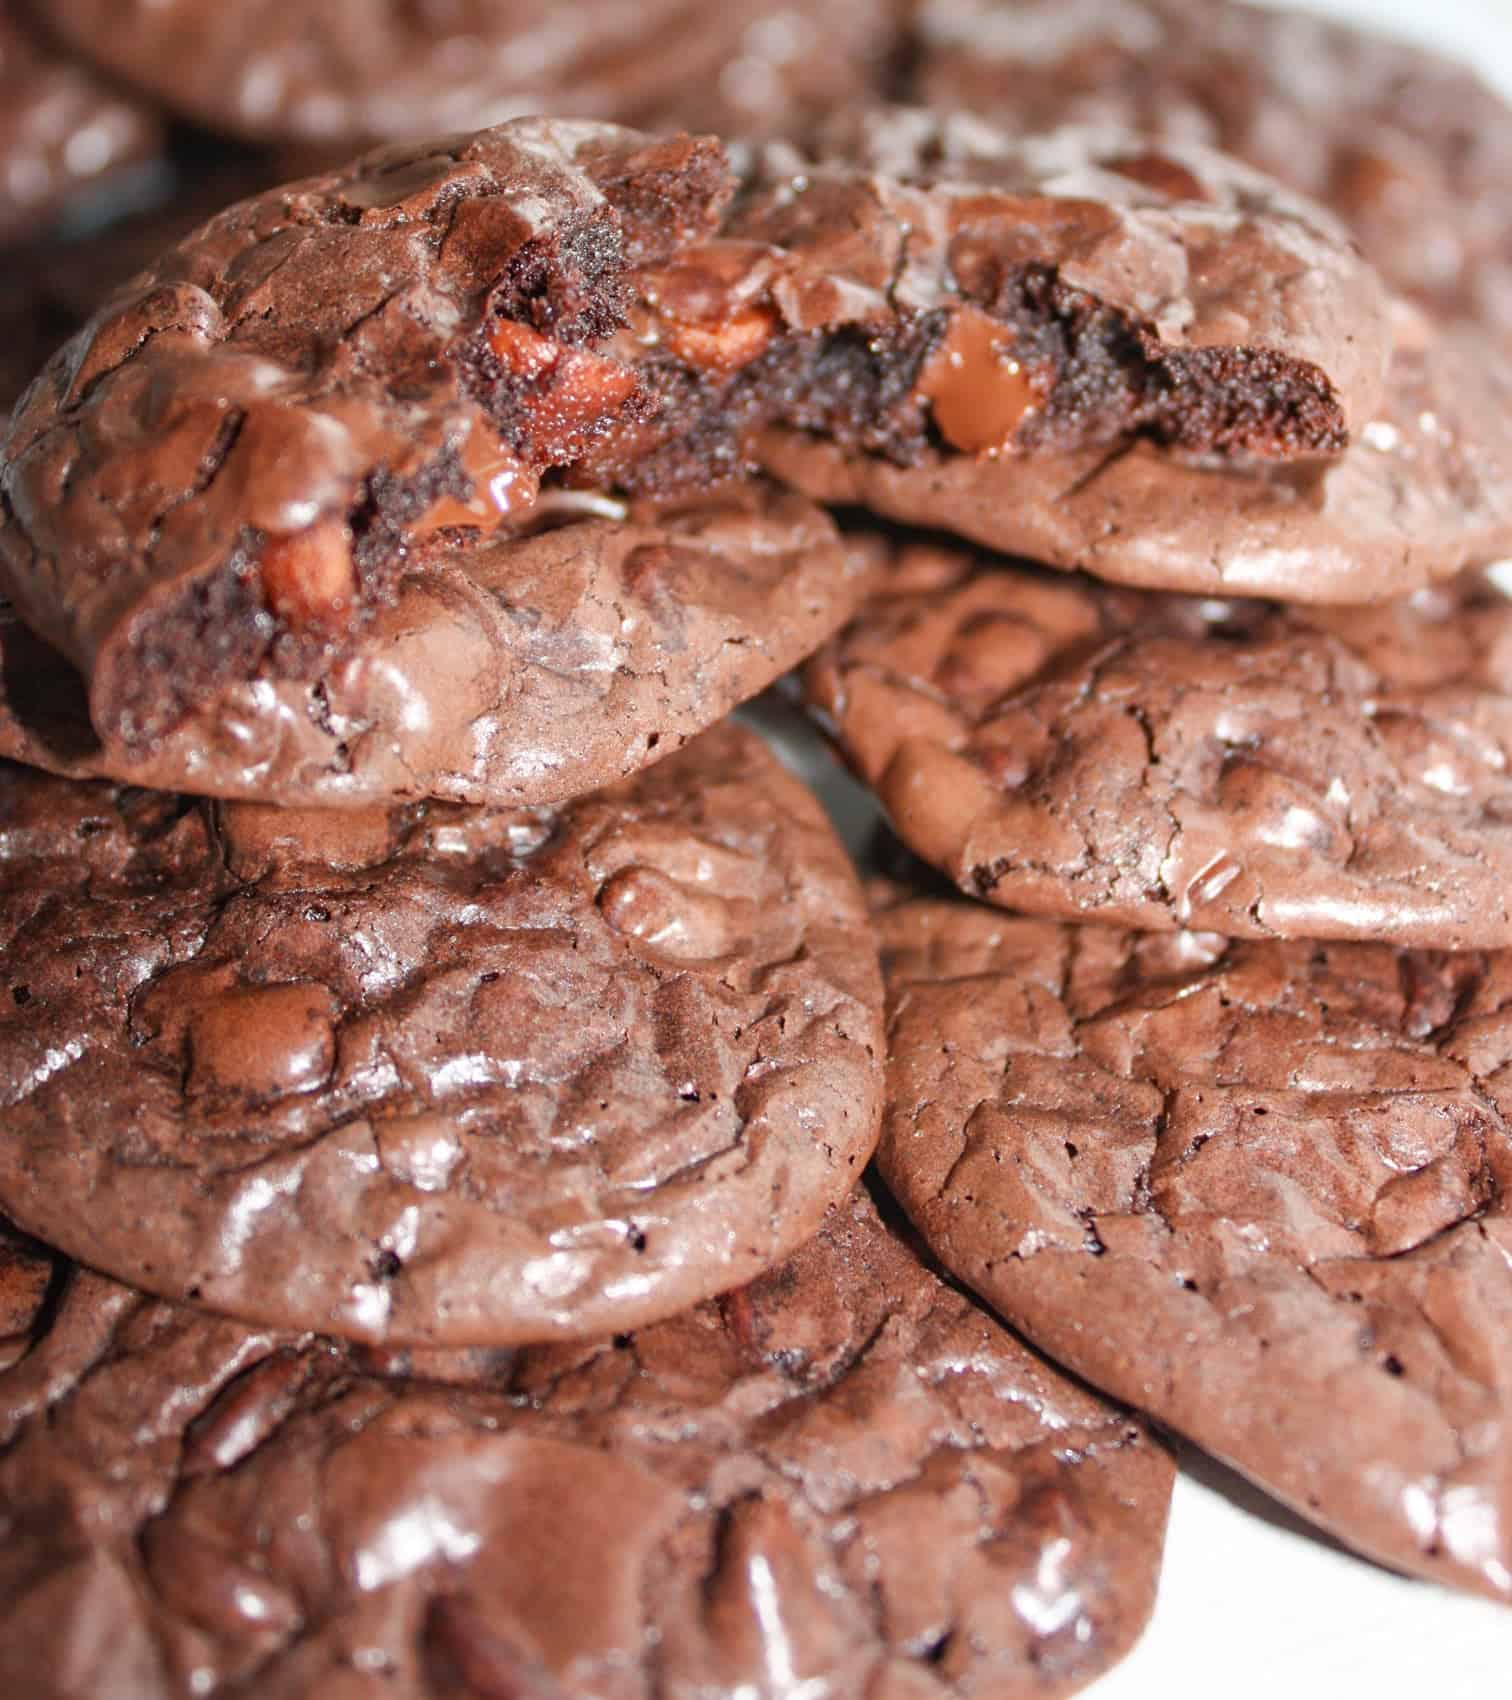 For all of us that need to avoid gluten, Flourless Chocolate Cookies are a decadent treat, with their triple hit of chocolate, chewy goodness.  